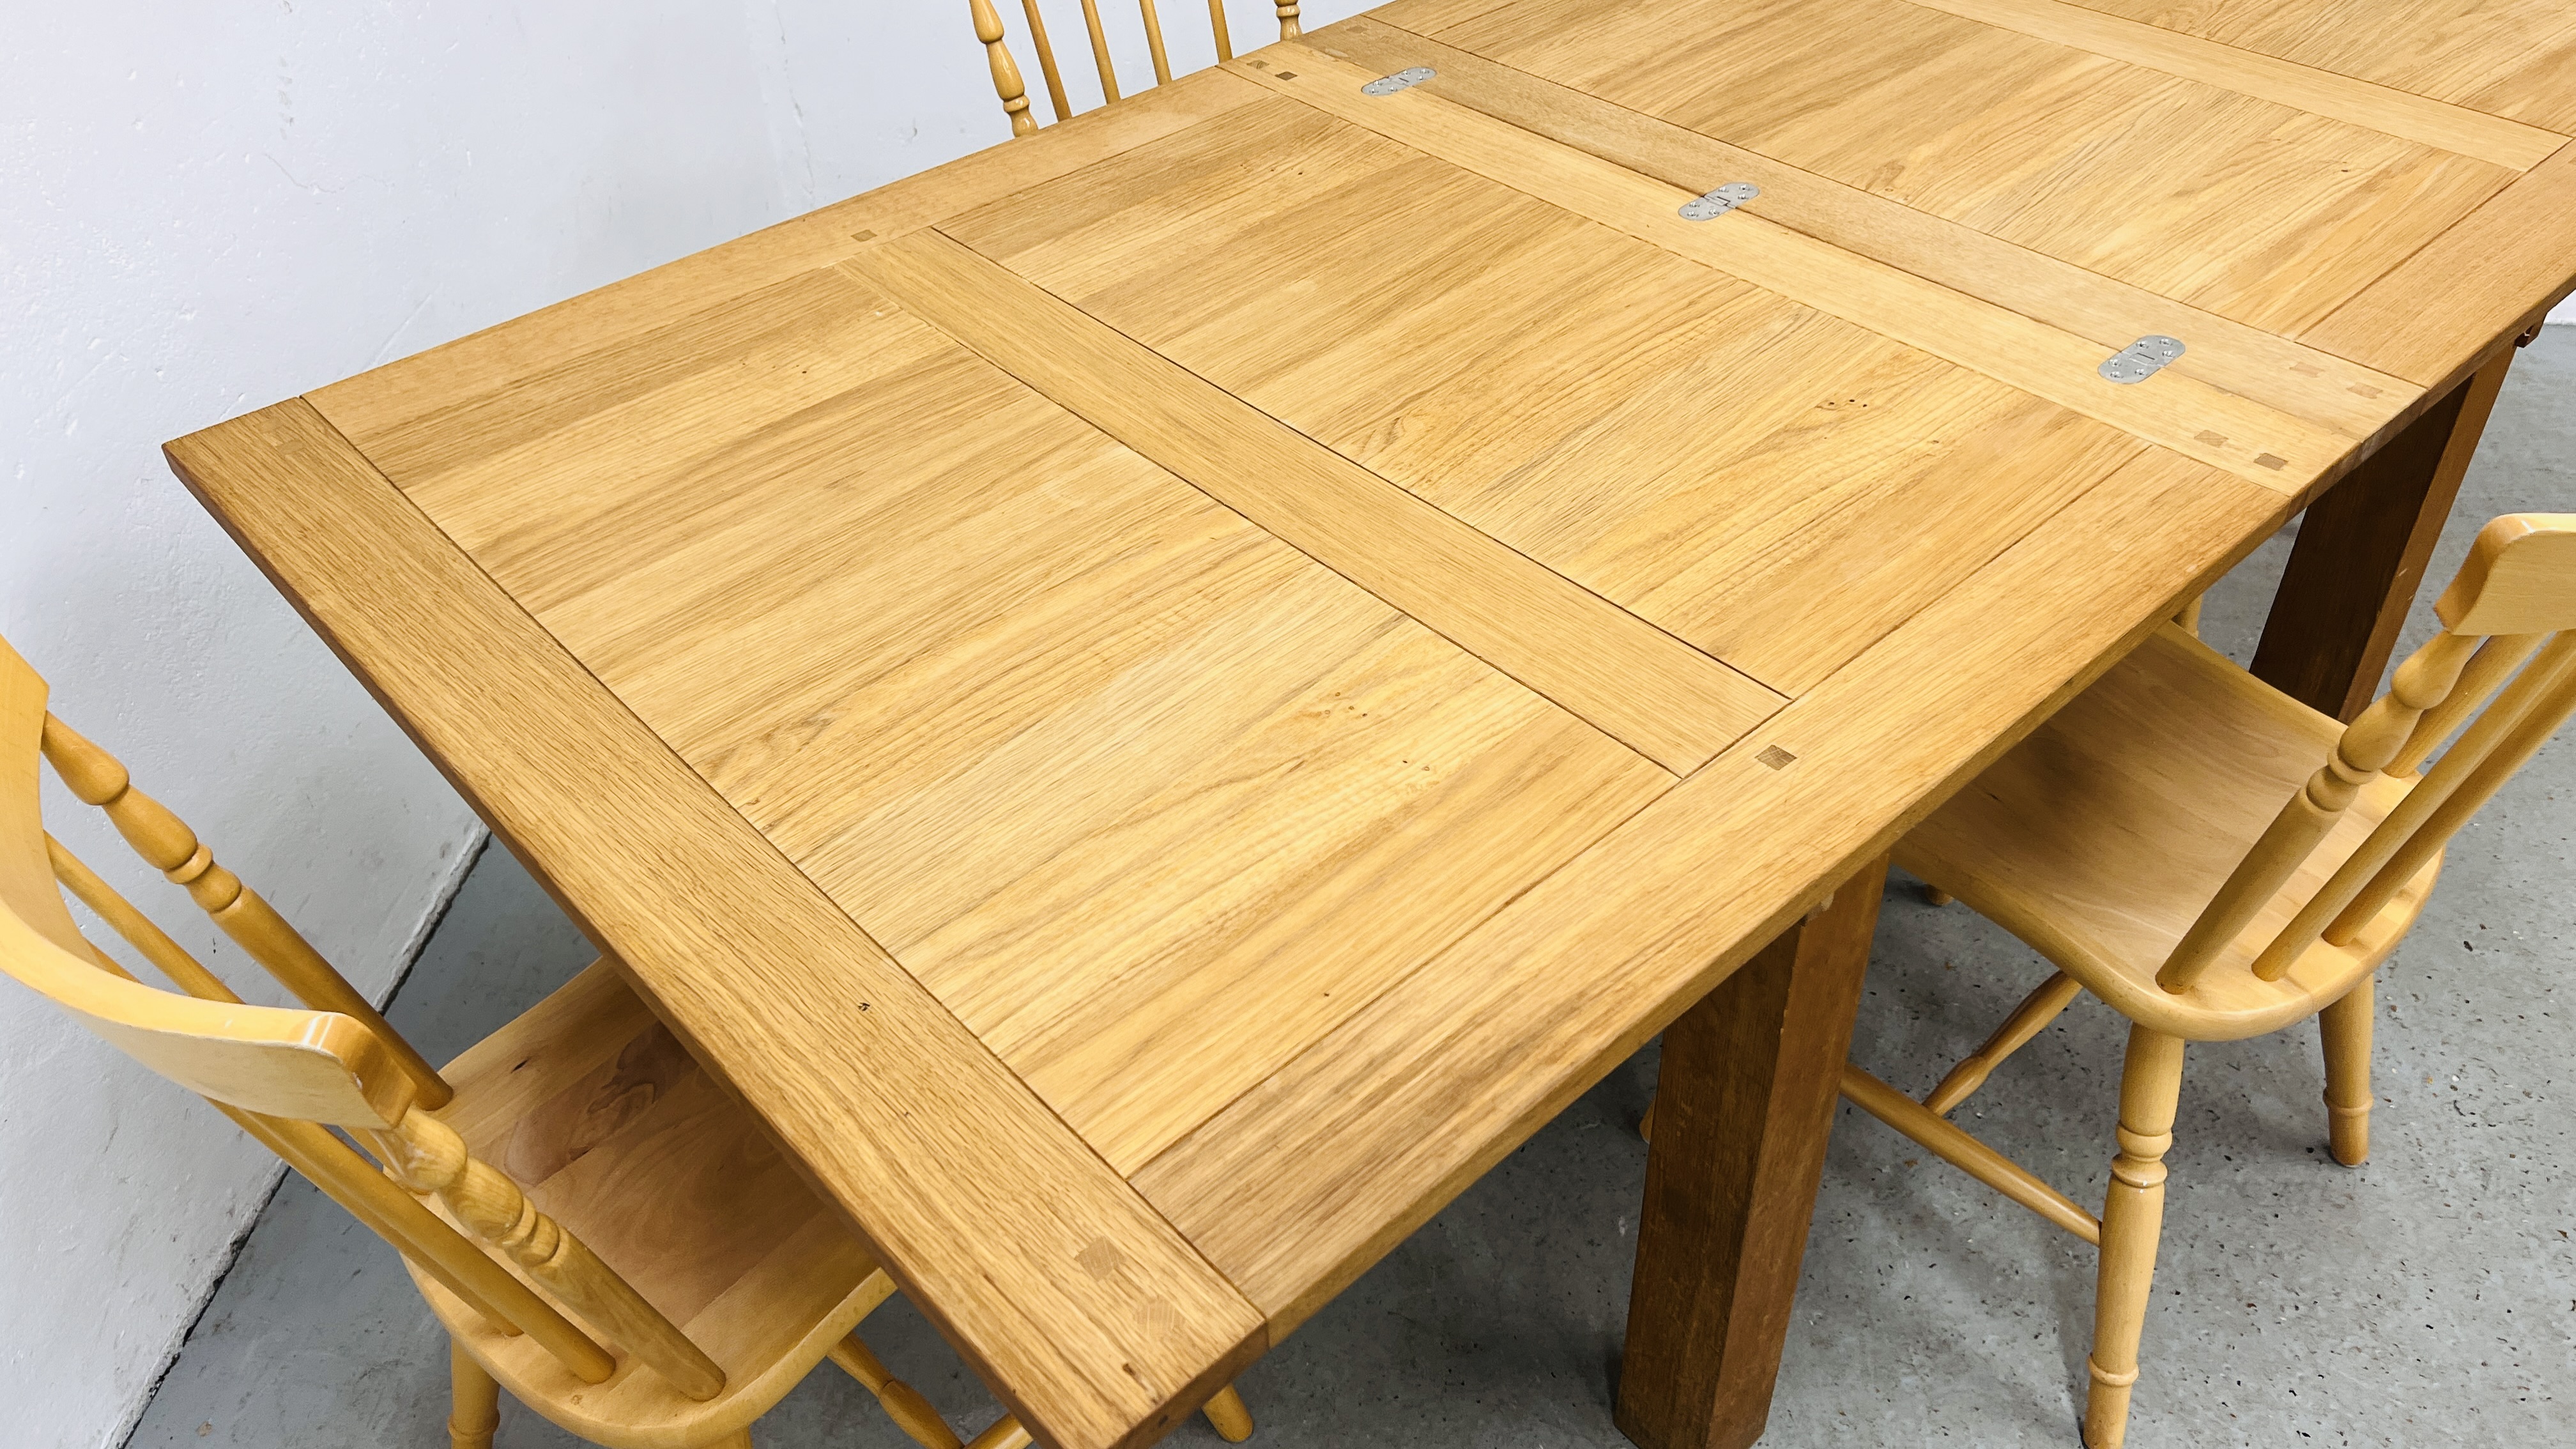 A SOLID OAK EXTENDING DINING TABLE ALONG WITH A SET OF FOUR BEECH WOOD DINING CHAIRS - Image 12 of 14